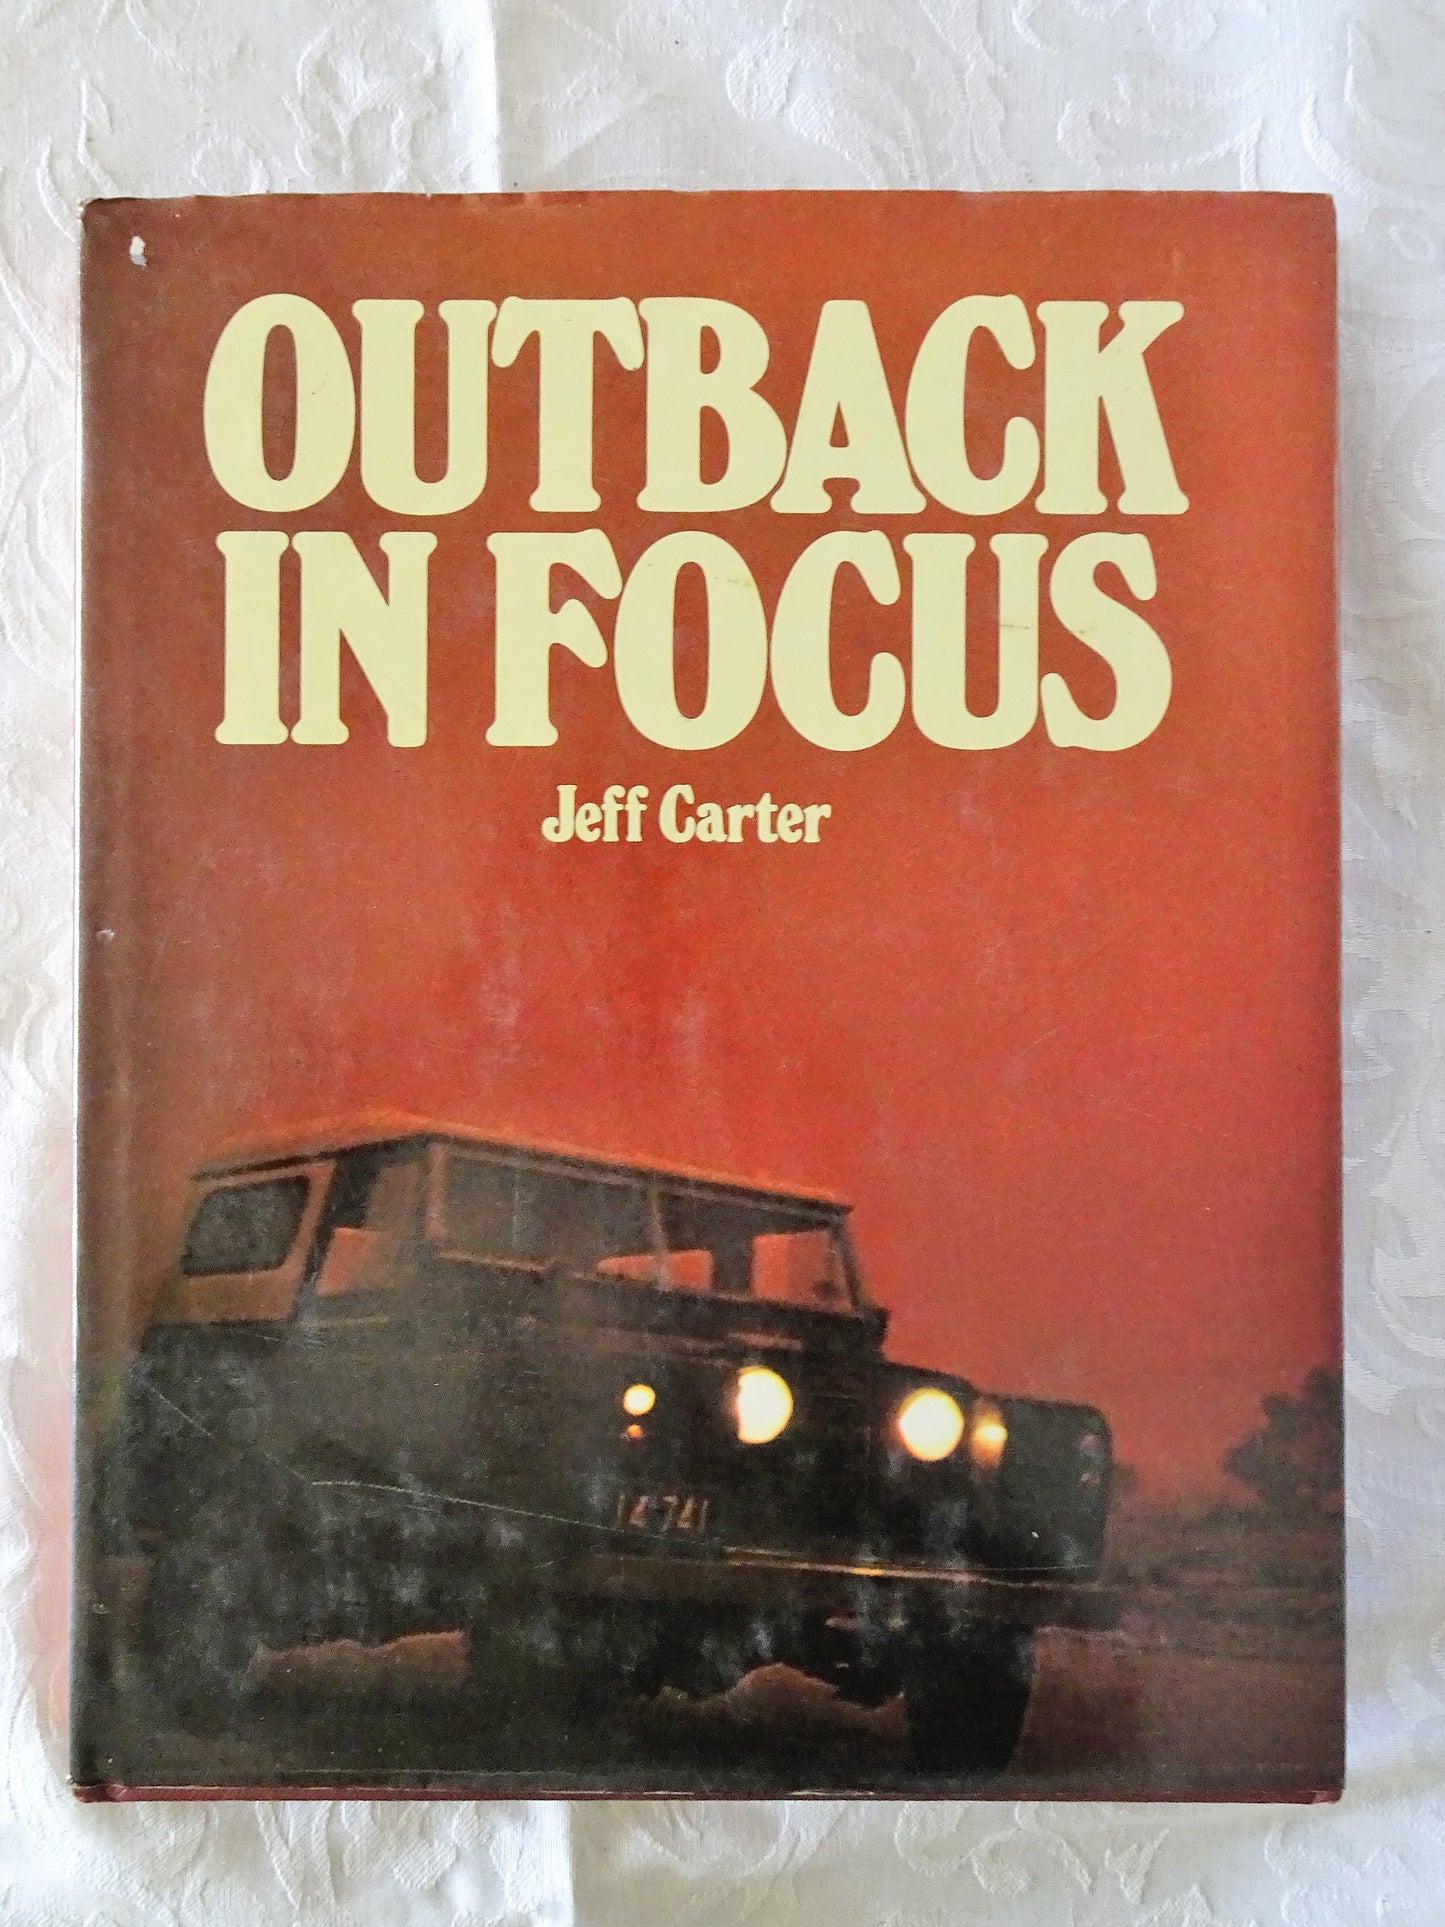 Outback In Focus by Jeff Carter